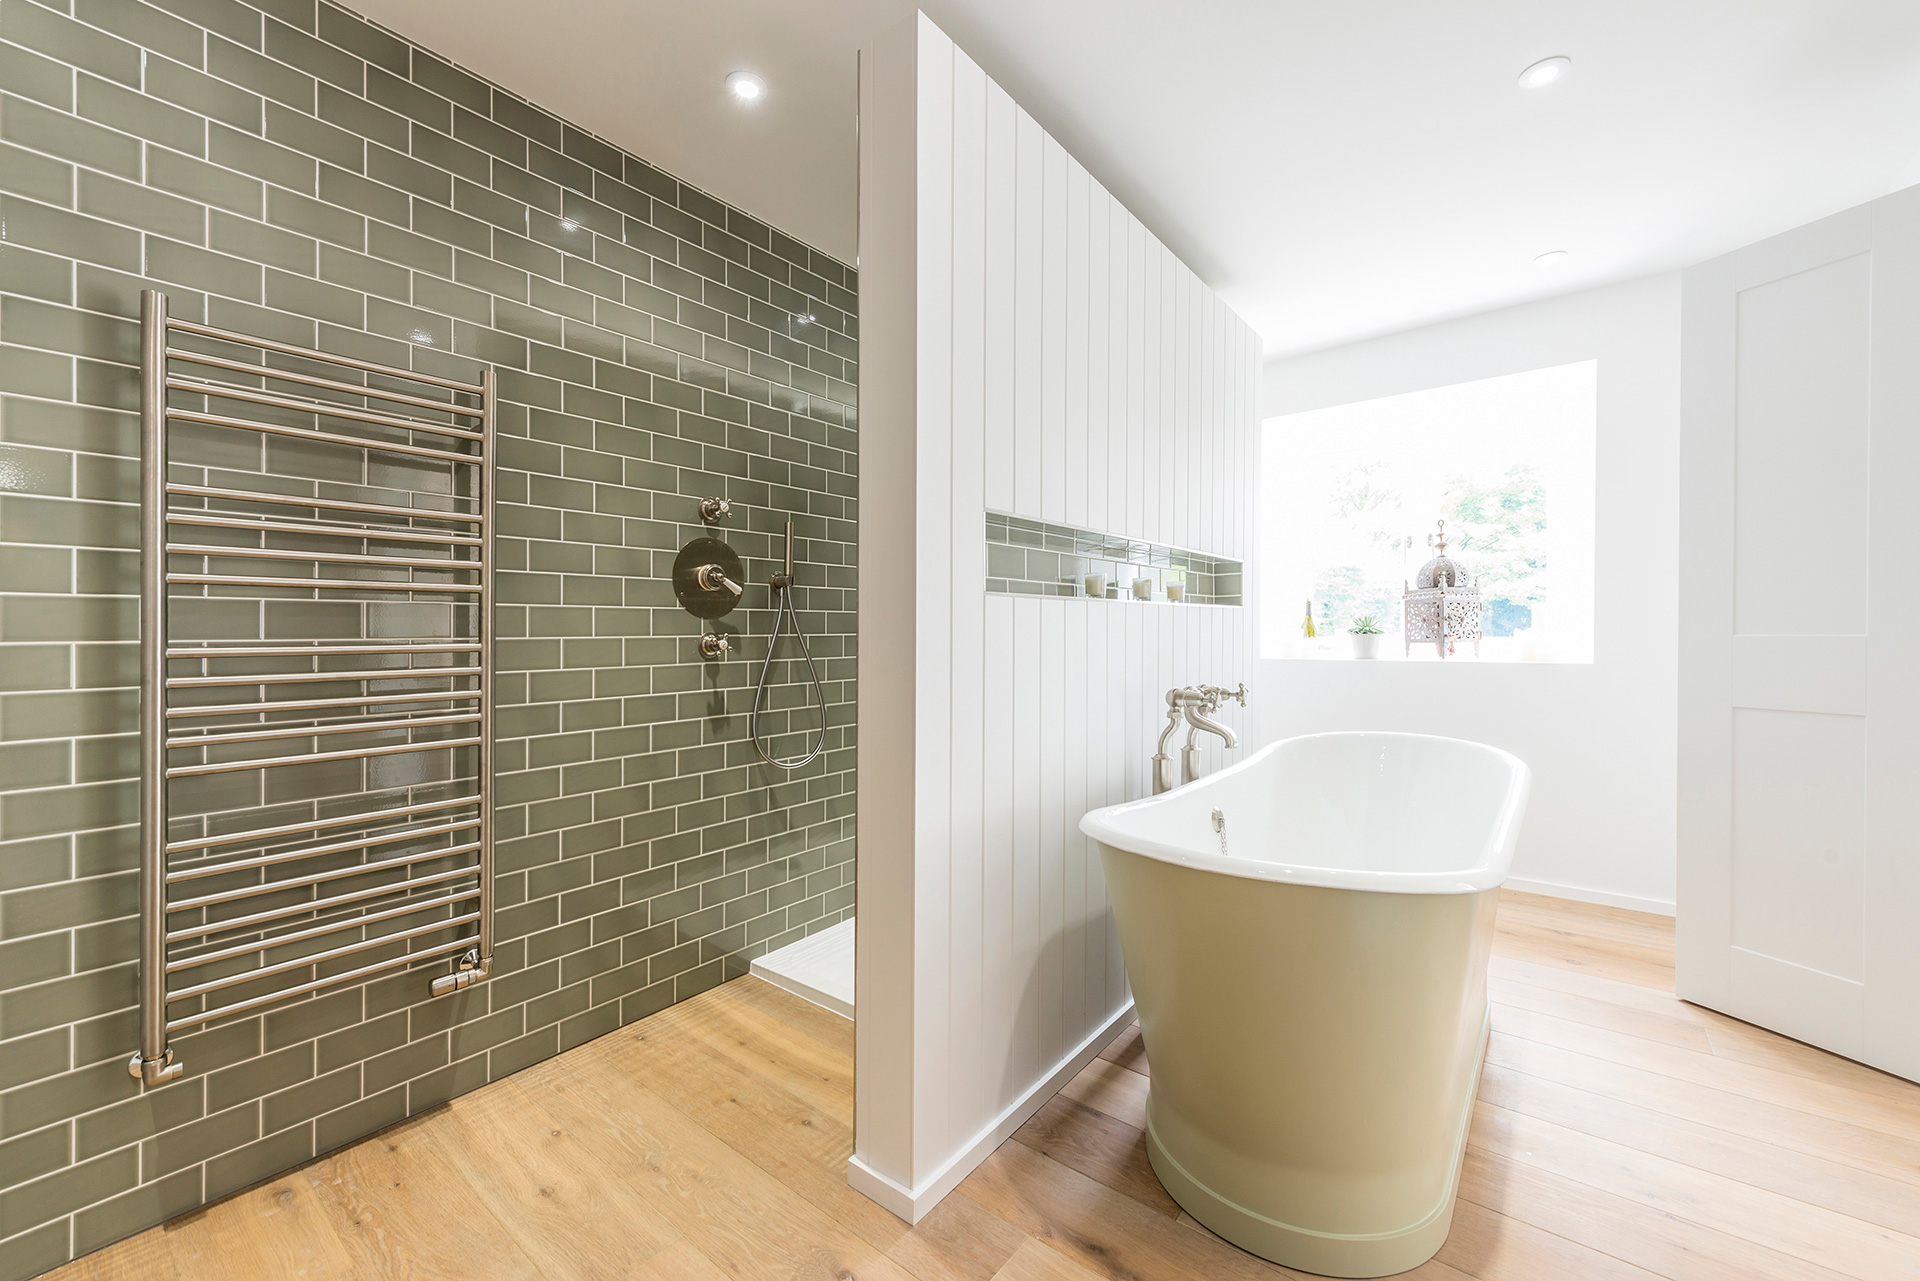 modern large bathroom with large freestanding bath and green wall tiles in shower